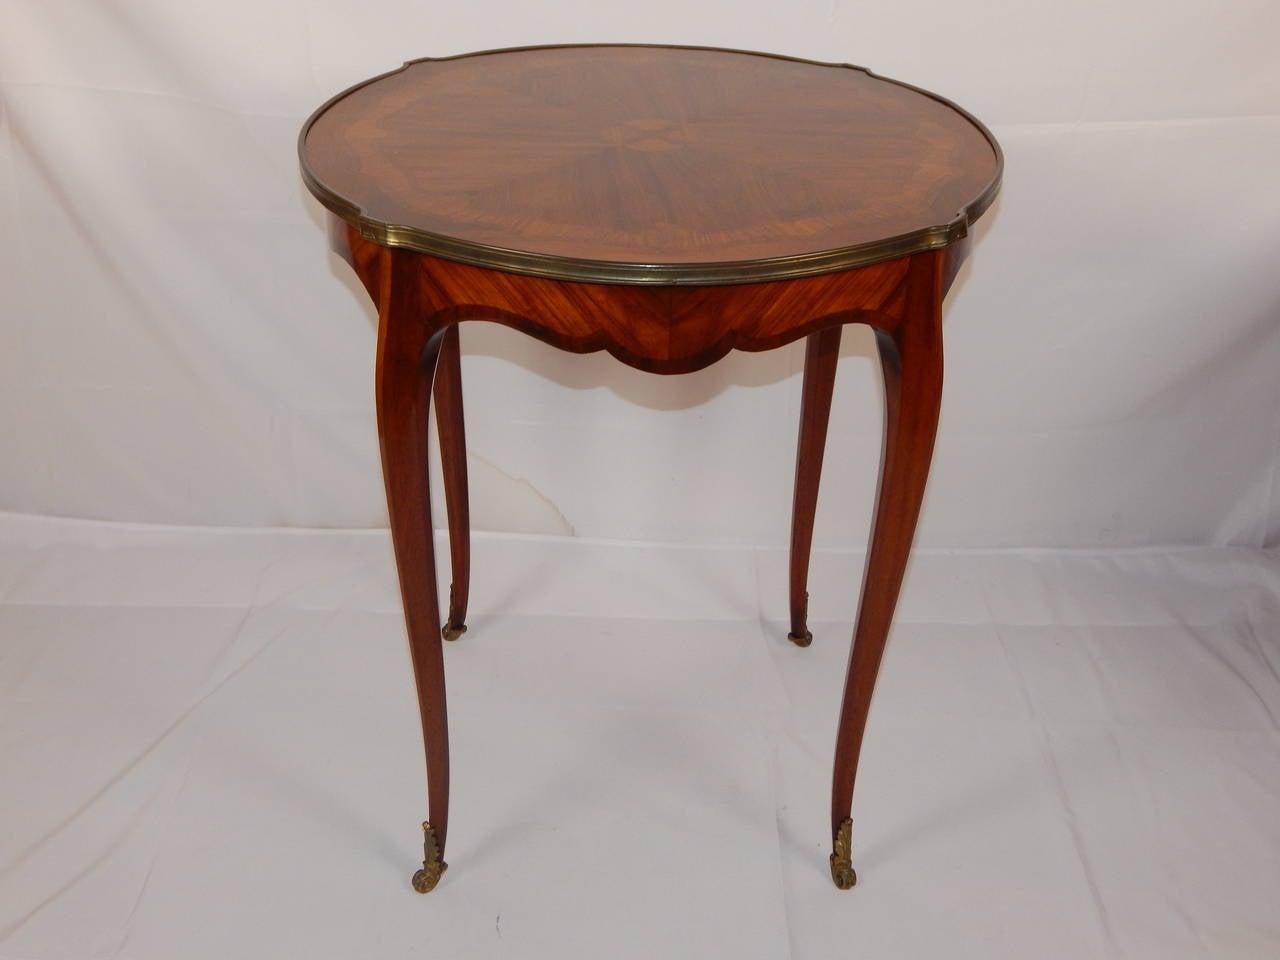 A lovely pair of Louis XV style Rosewood inlaid bouillotte tables, also
known as end or lamp tables, with bronze feet.